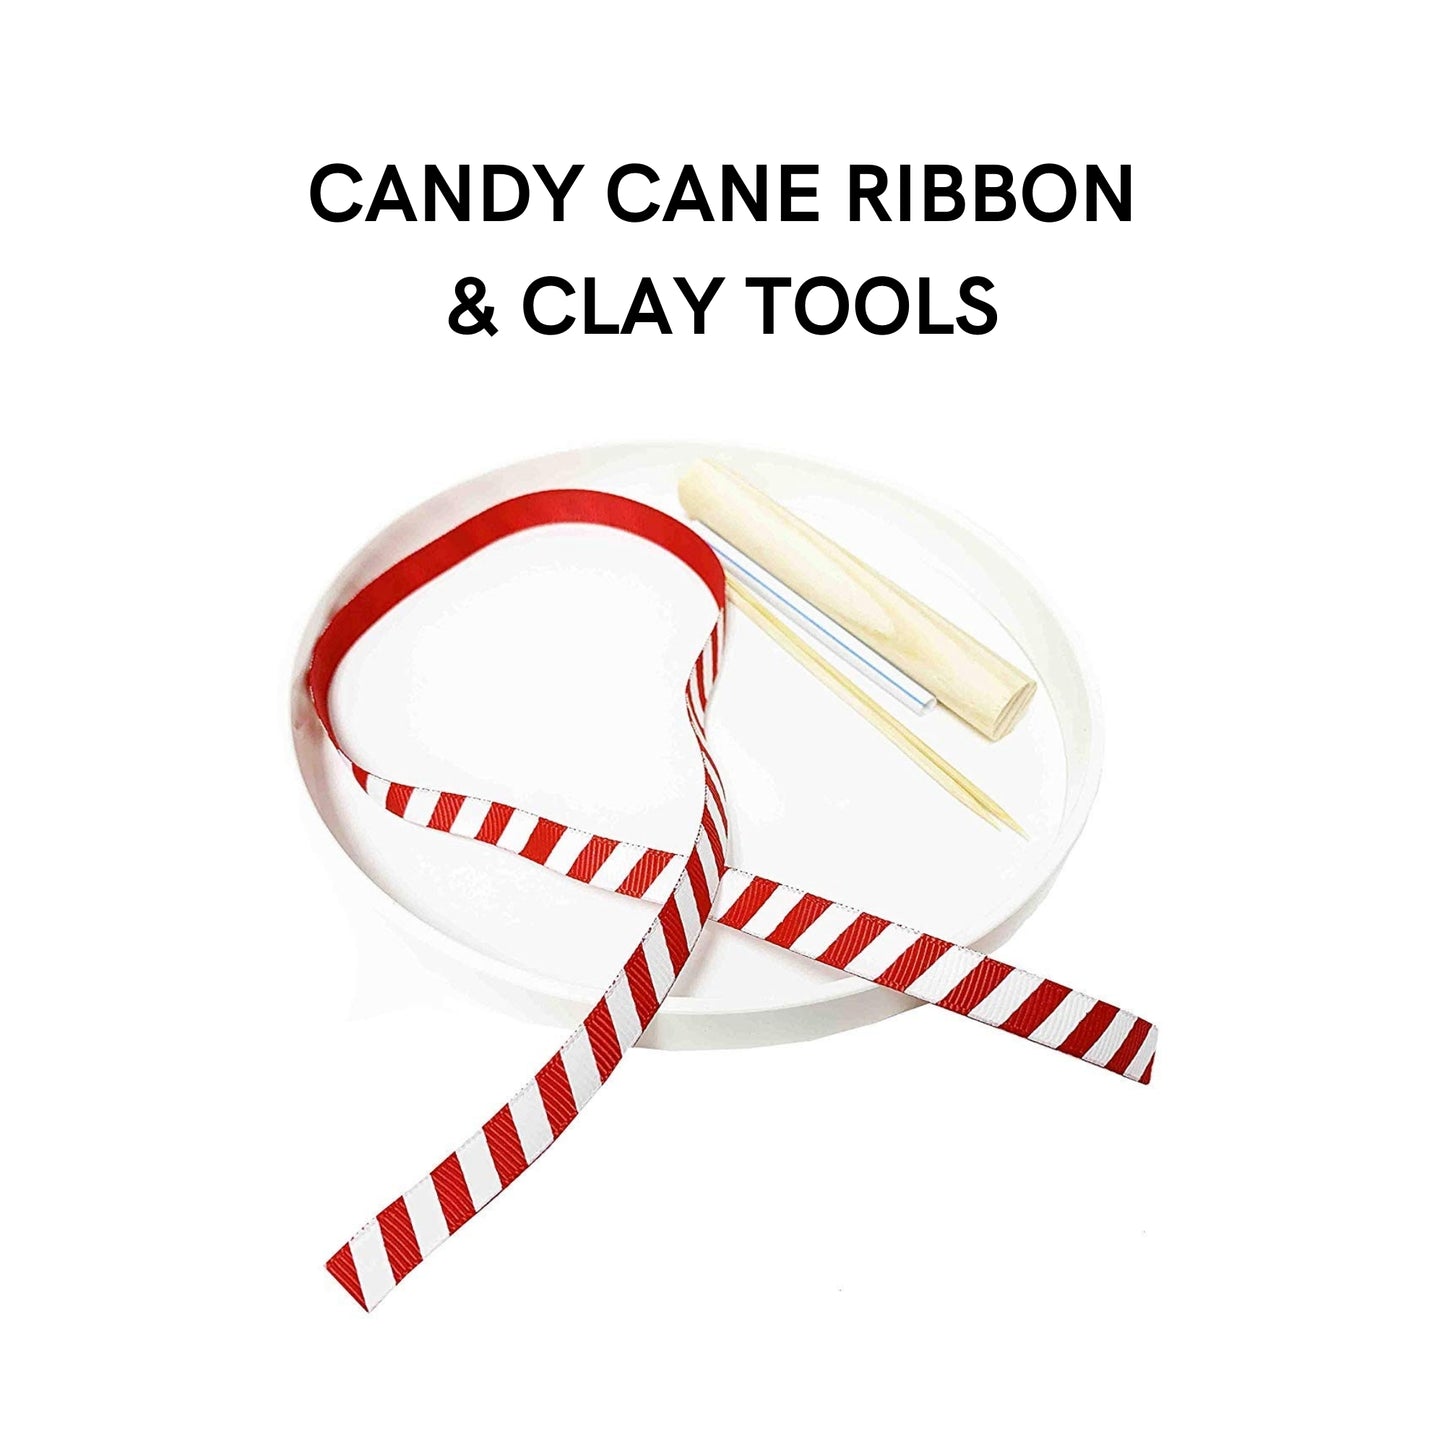 Midlee Candy Cane Ribbon Paw Print Ornament